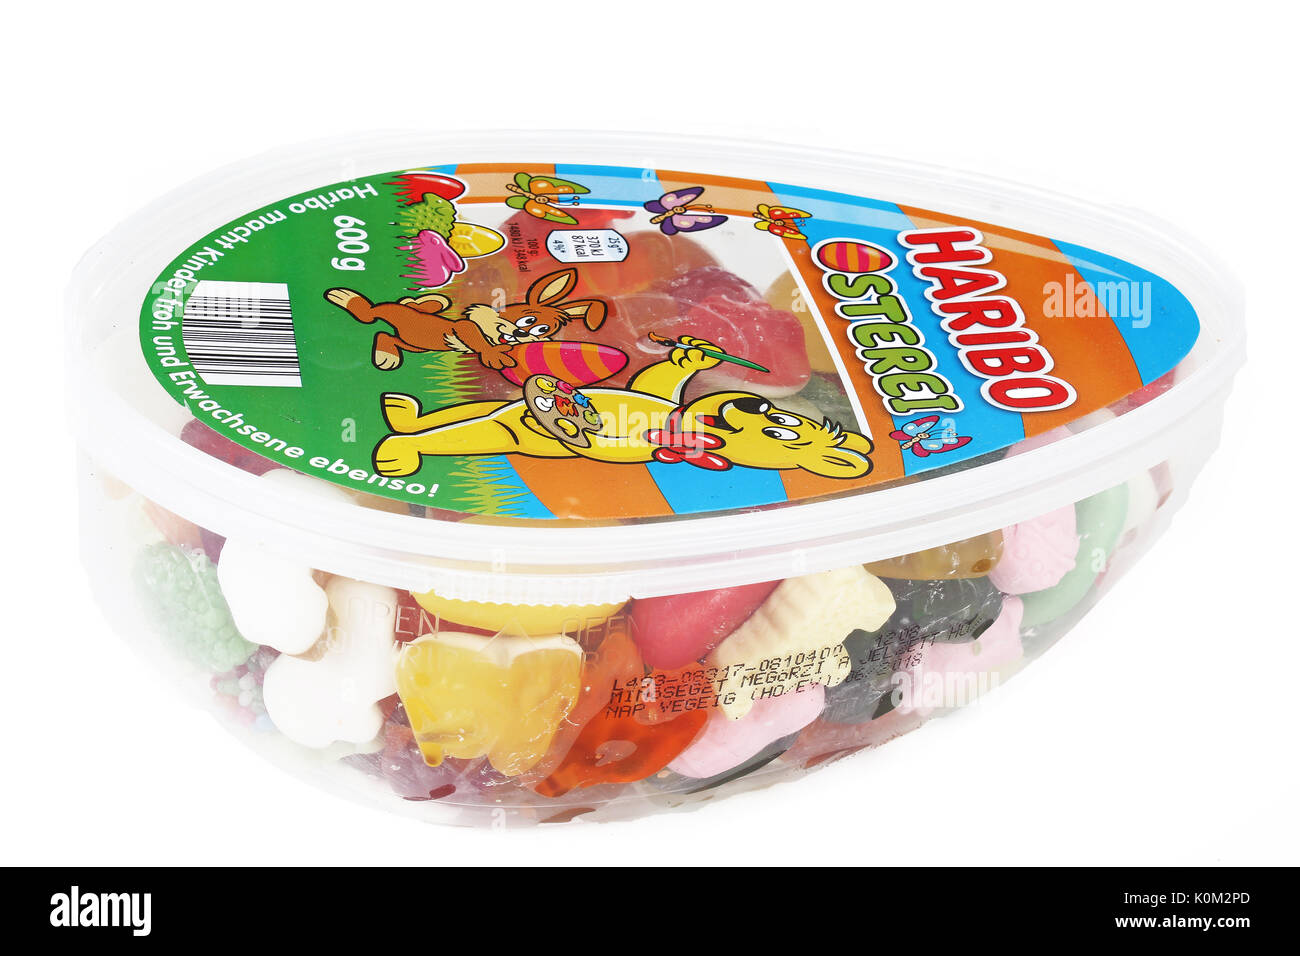 Page 2 - Haribo High Resolution Stock Photography and Images - Alamy